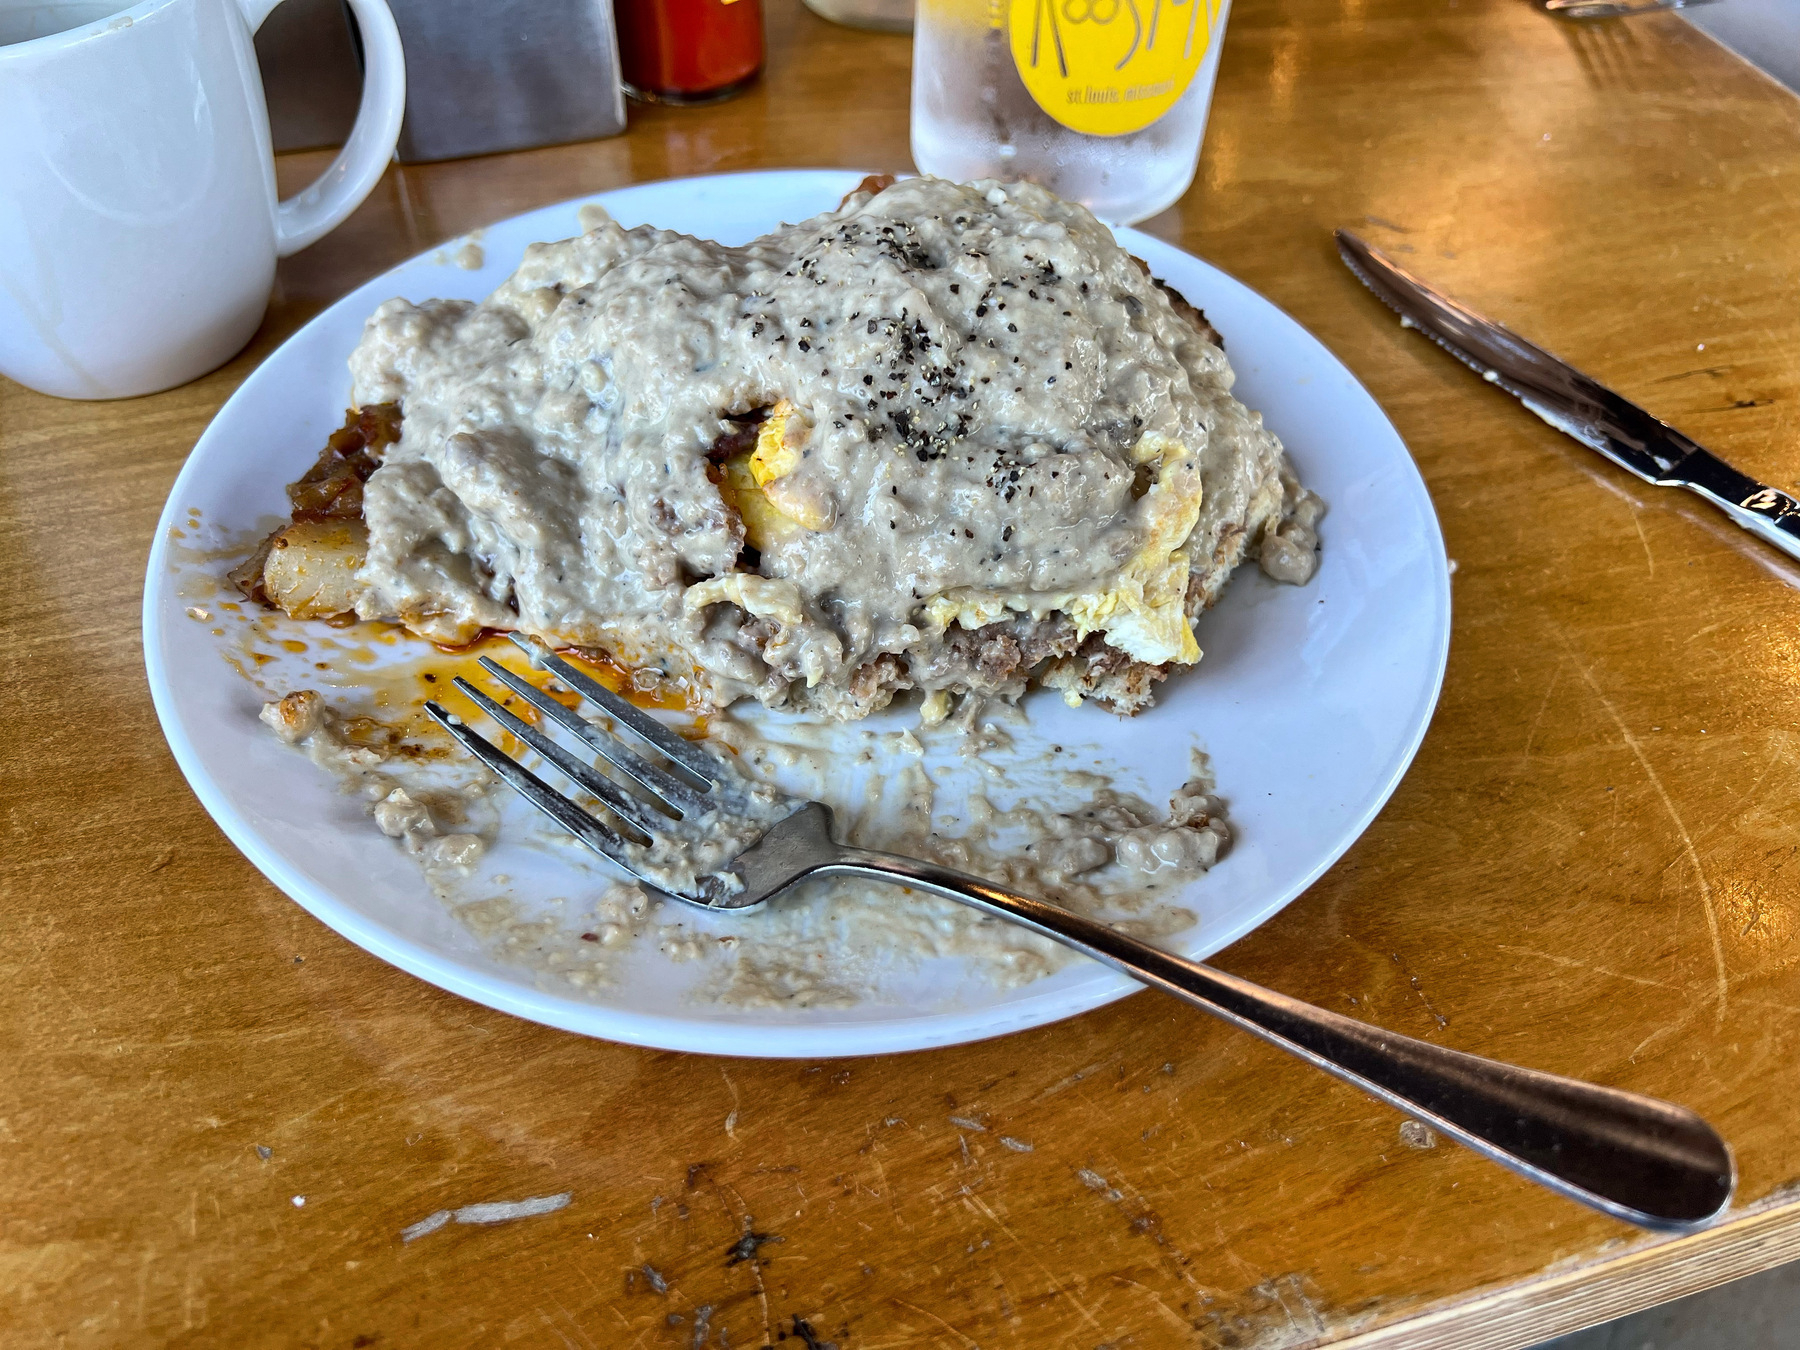 Vegan slinger (sourdough toast, vegetarian sausage, and scrambled eggs, covered in gravy) on a white plate with a fork.